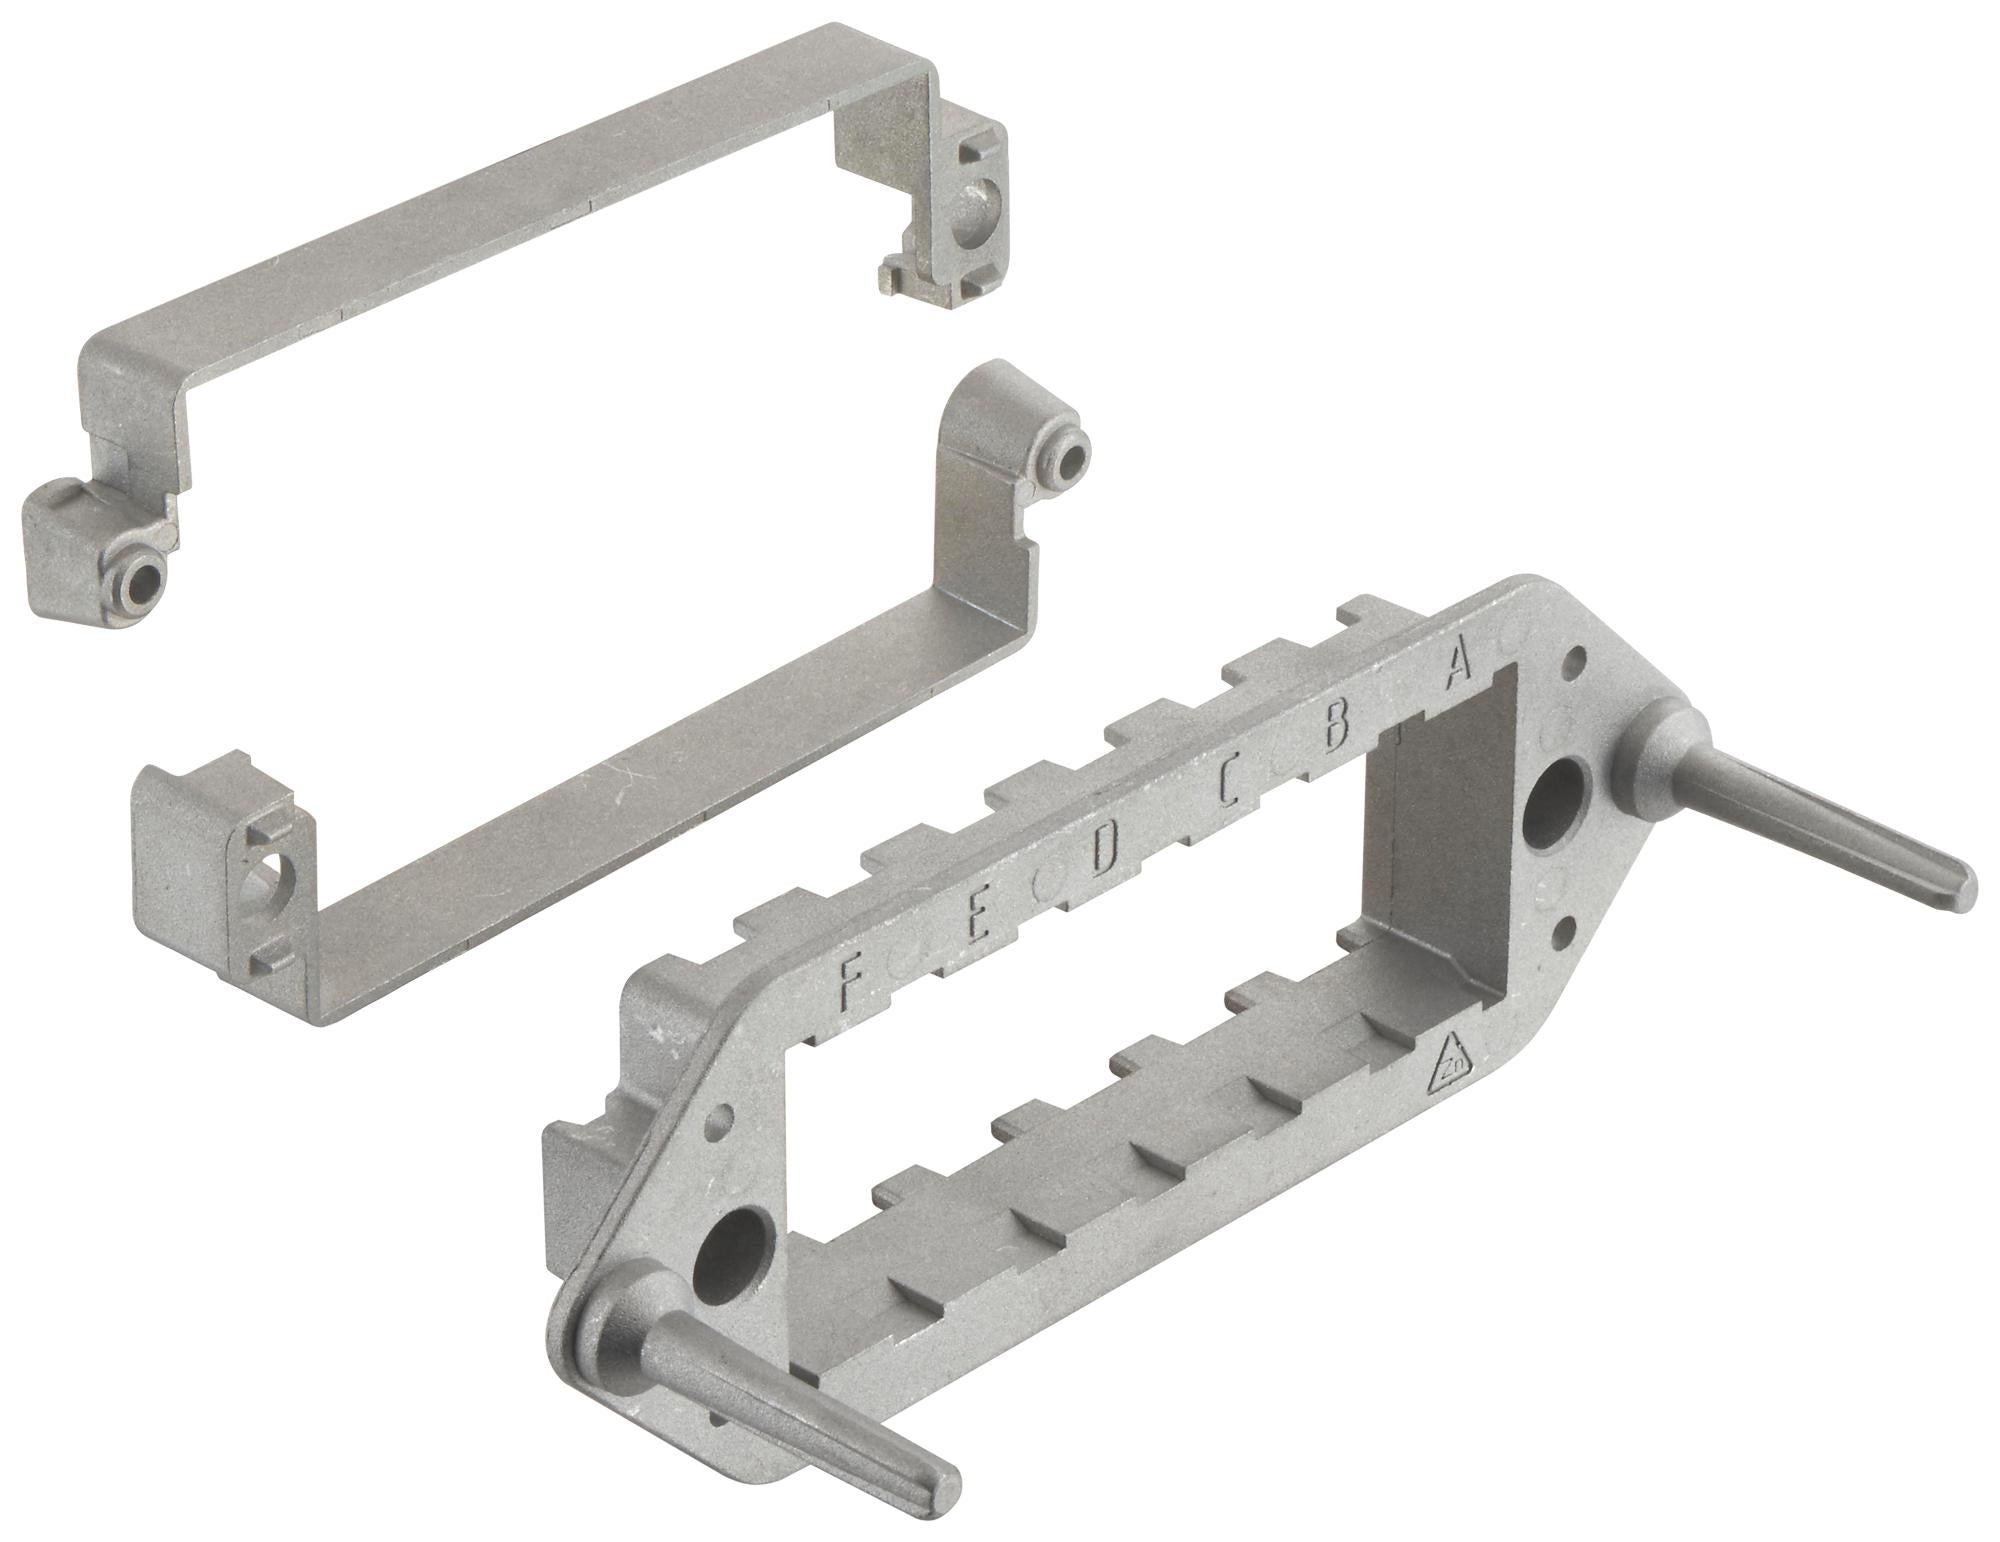 09140241716 DOCKING FRAME, INDUSTRIAL CONNECTOR HARTING